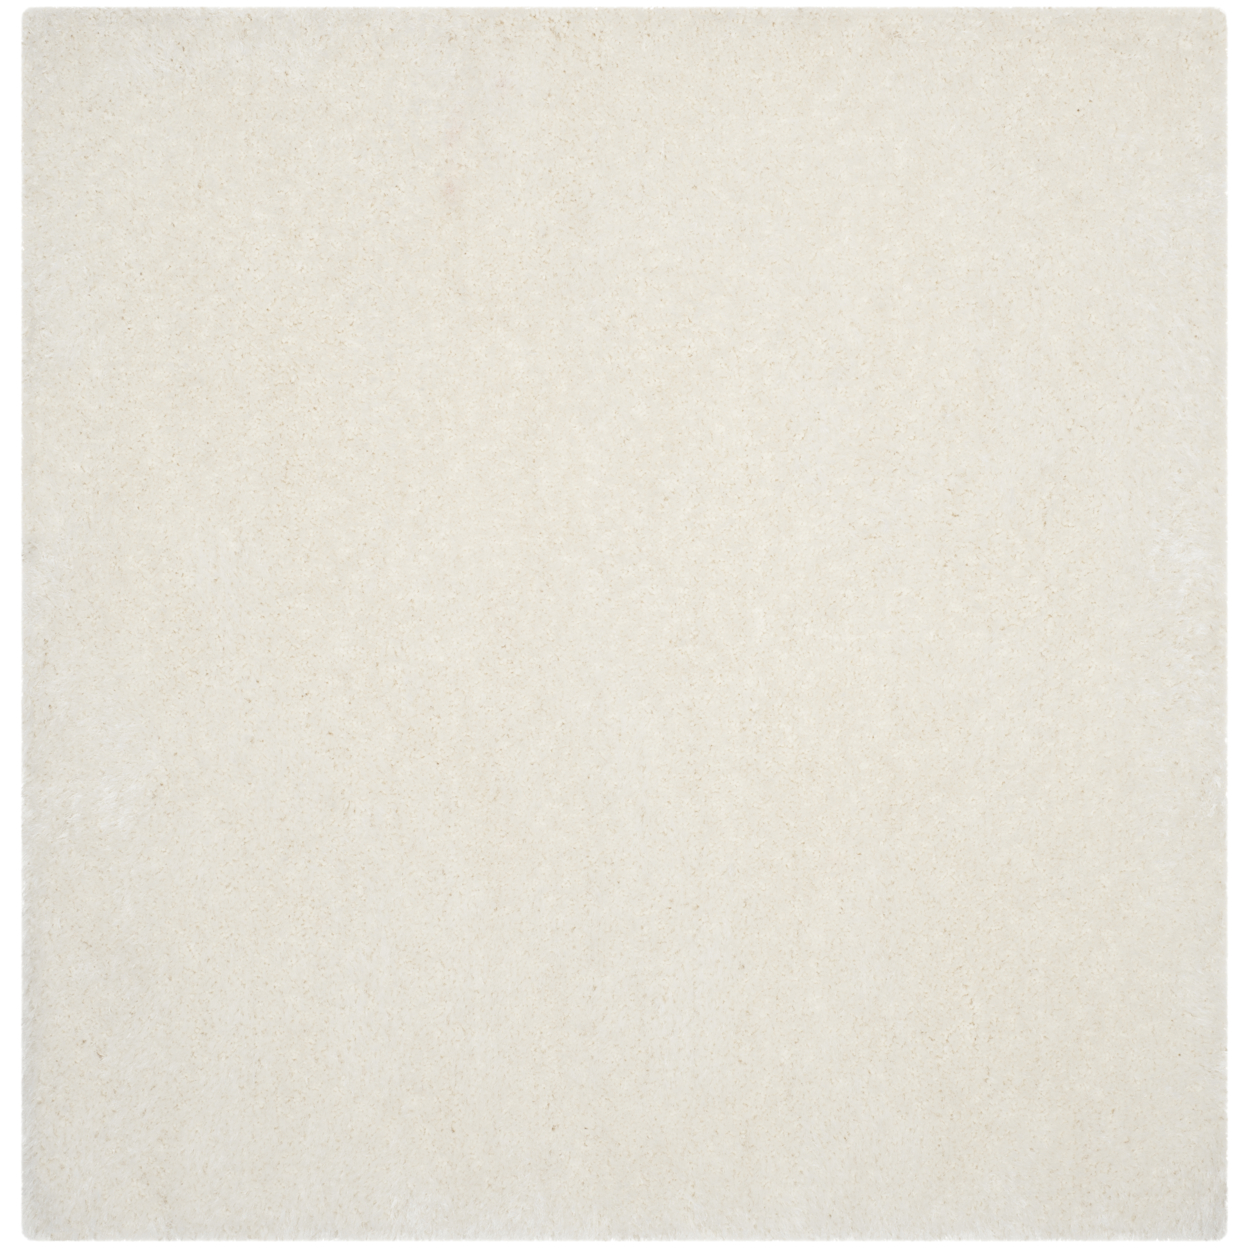 SAFAVIEH SGX160A Luxe Shag Ivory - 6' Square